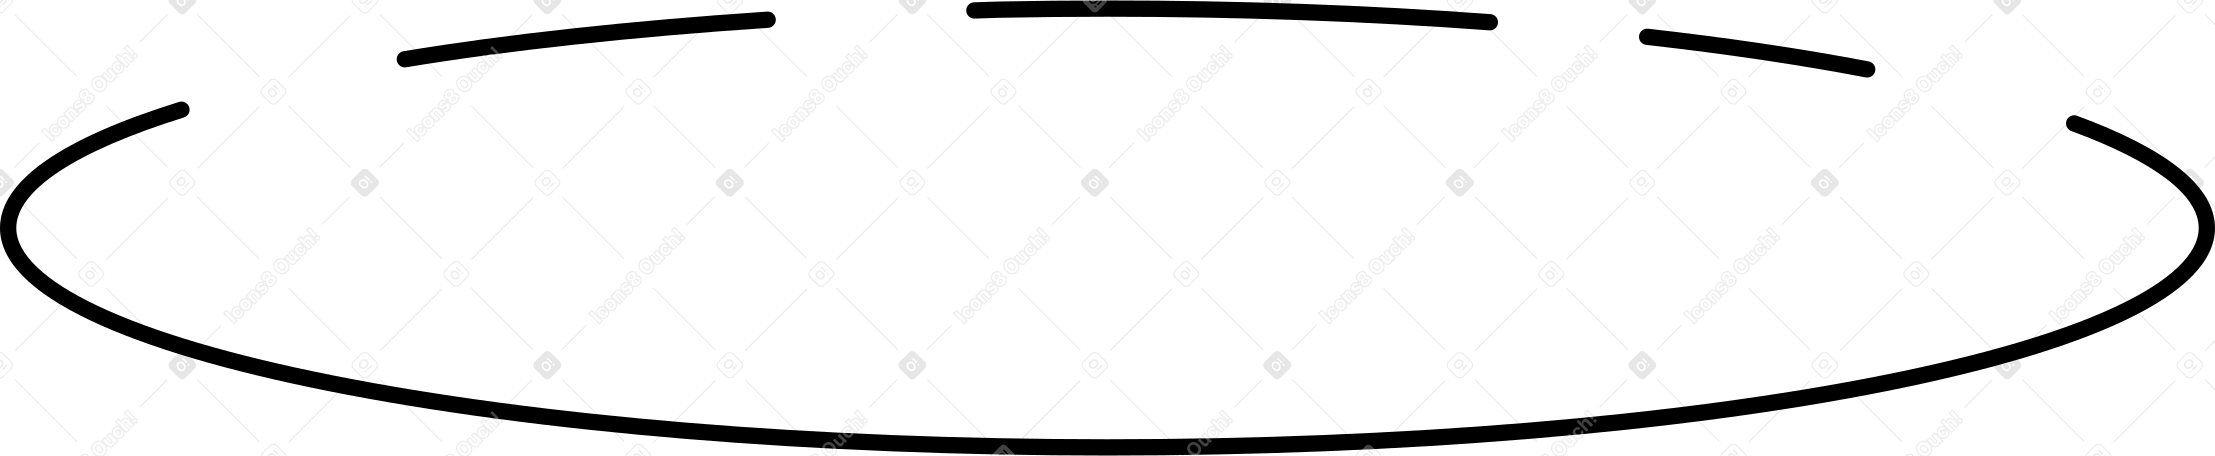 oval block of ice Illustration in PNG, SVG